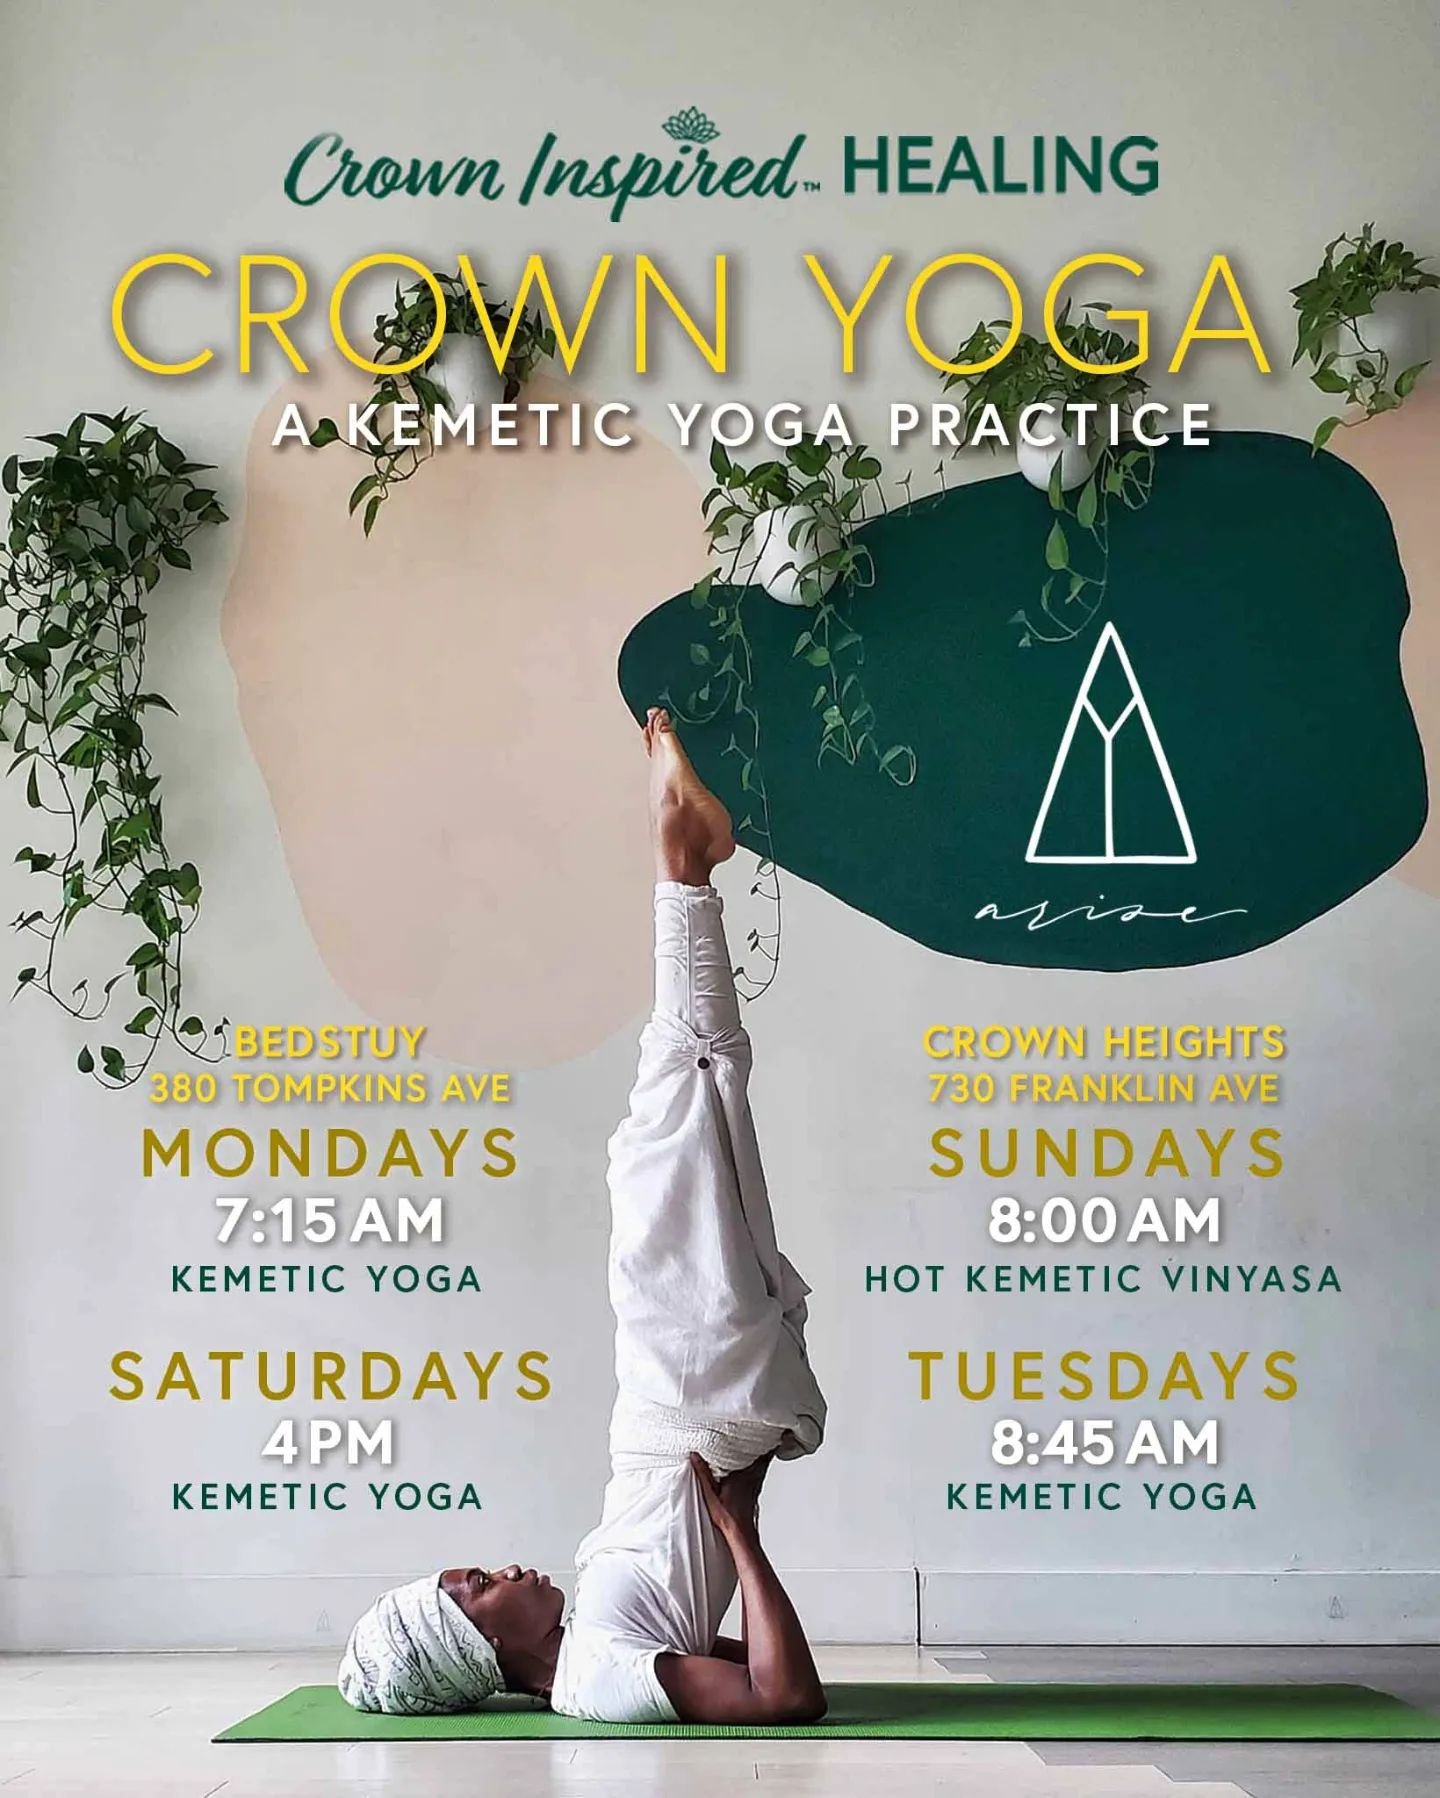 New yoga schedule at Arise Yoga. 

Expanding the crown is just as important as protecting it. Here are my available weekly classes at @ariseinbrooklyn

Now in two locations:
On Sundays &amp; Tuesdays in the 8am hour in Crown Heights and in Bedstuy, i